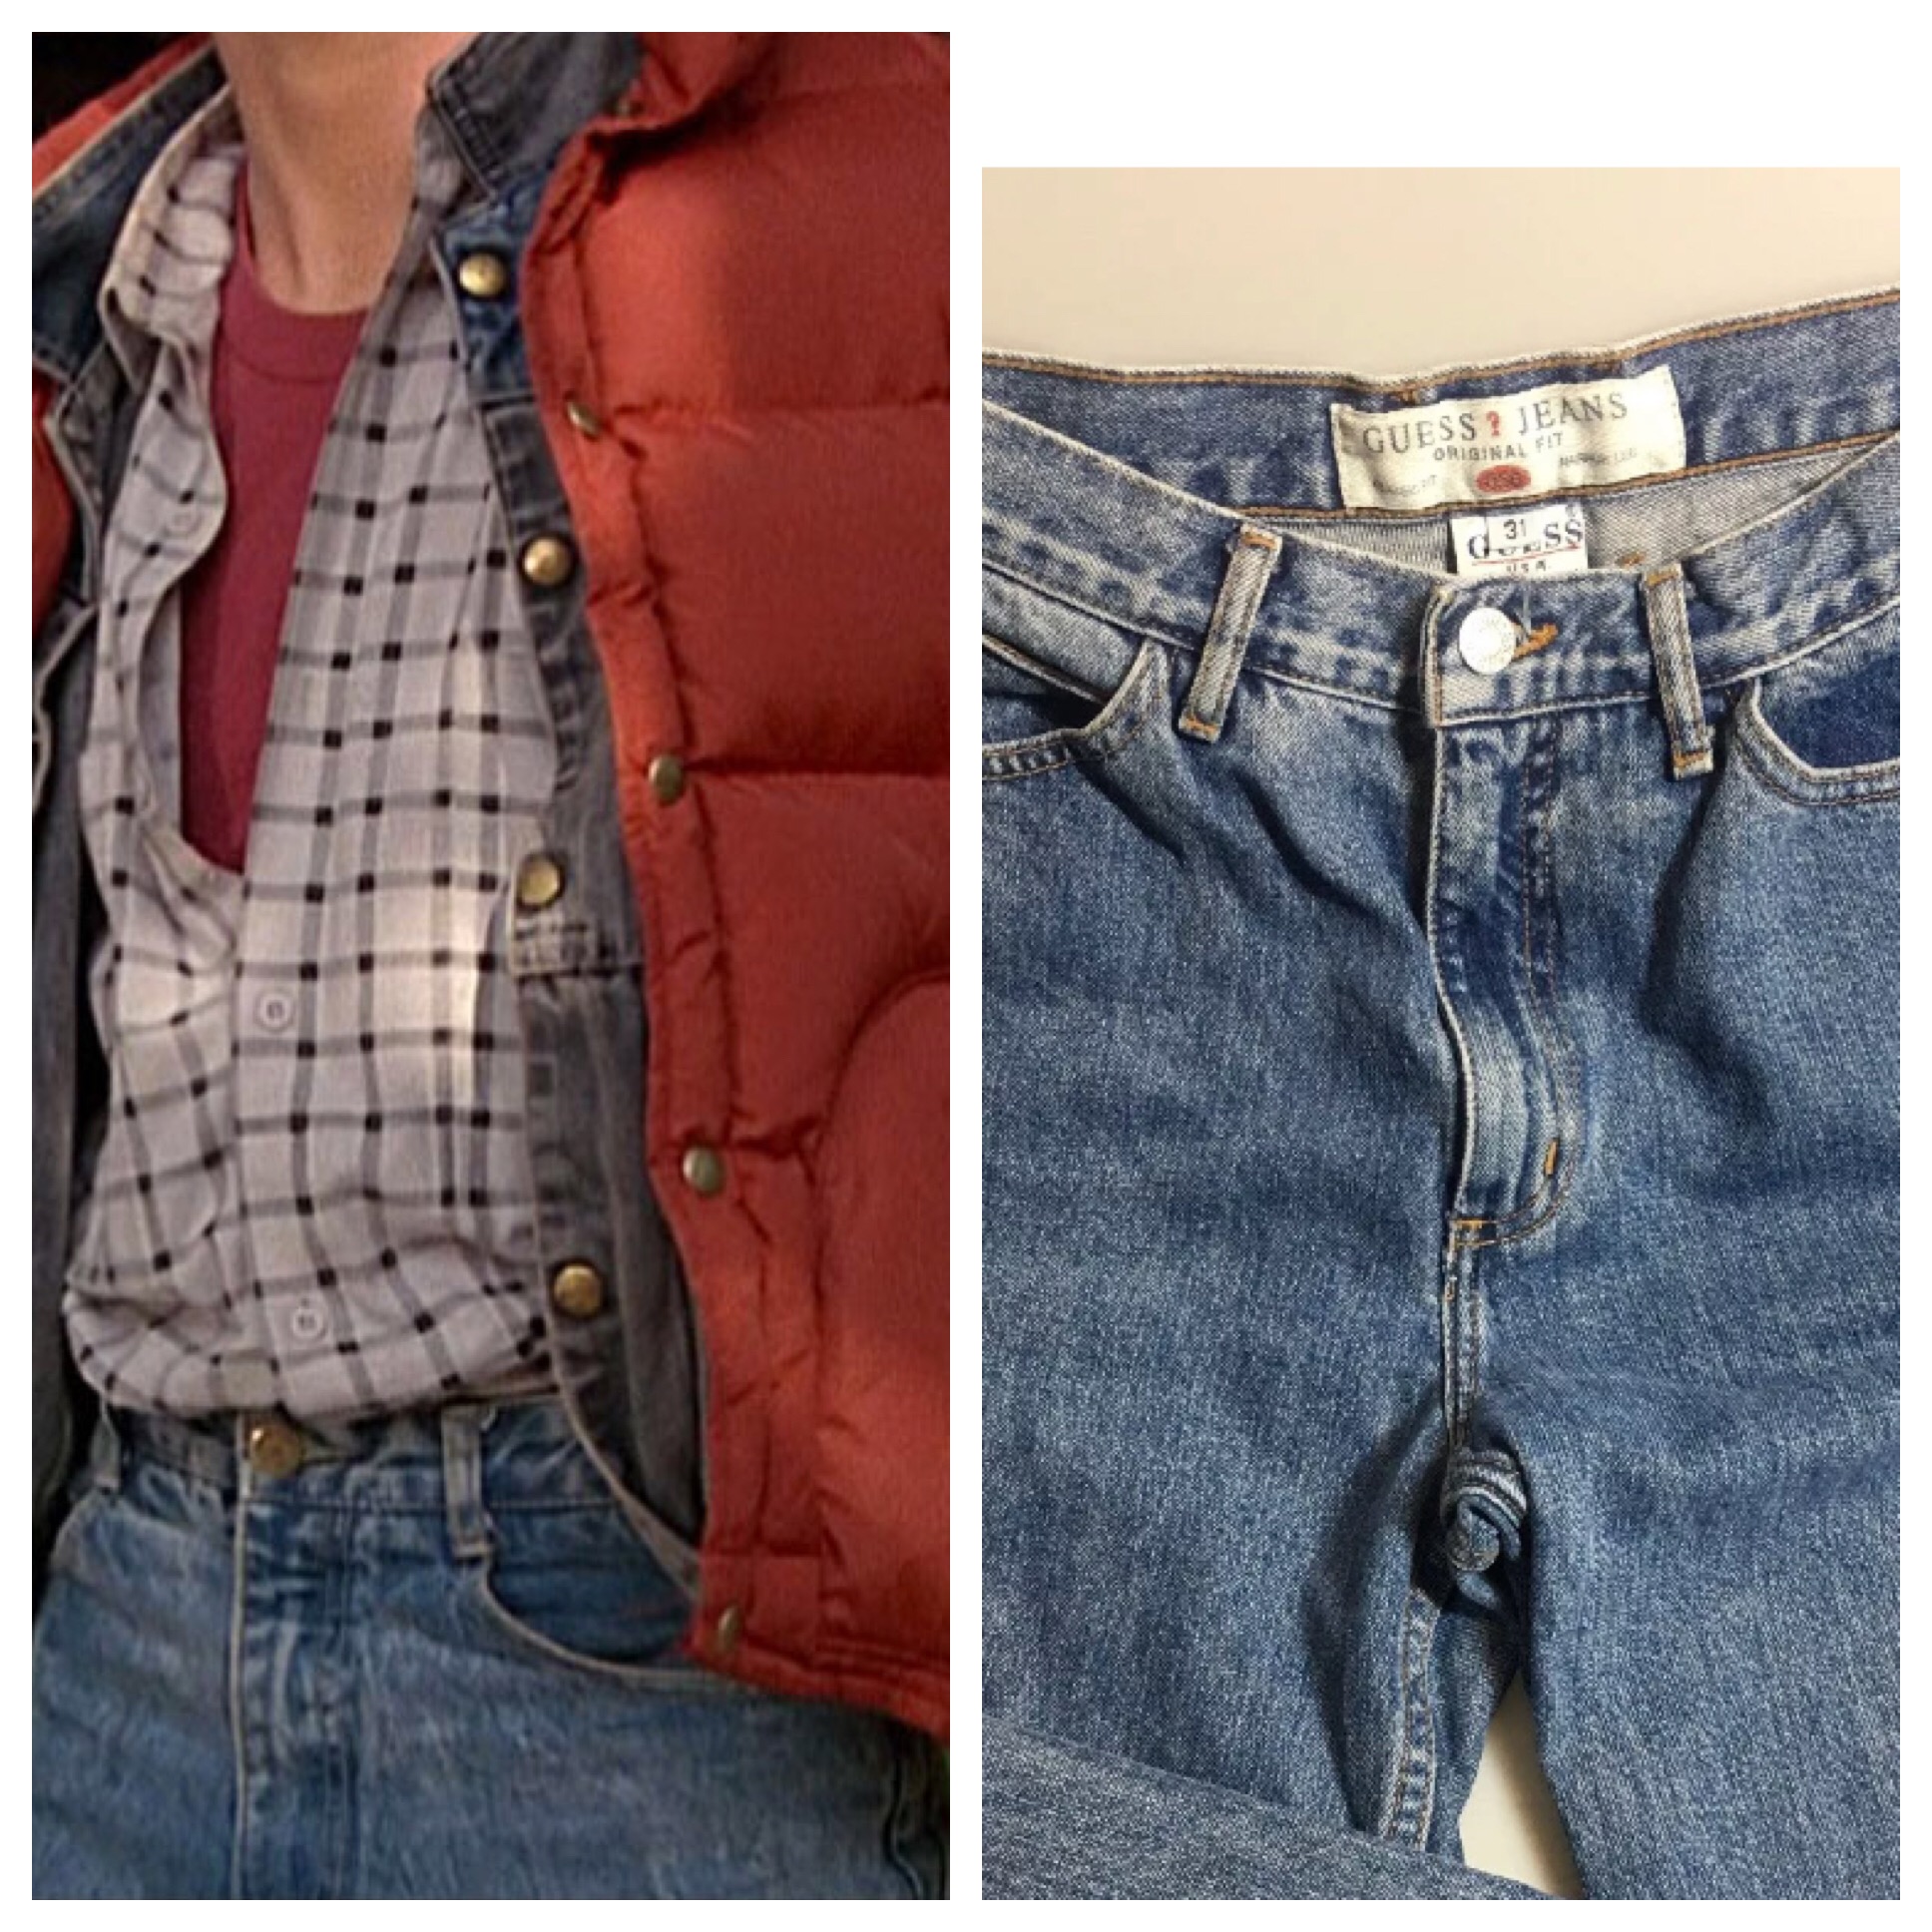 Marty McFly's Jeans...Let's Talk | RPF Costume and Prop Maker Community